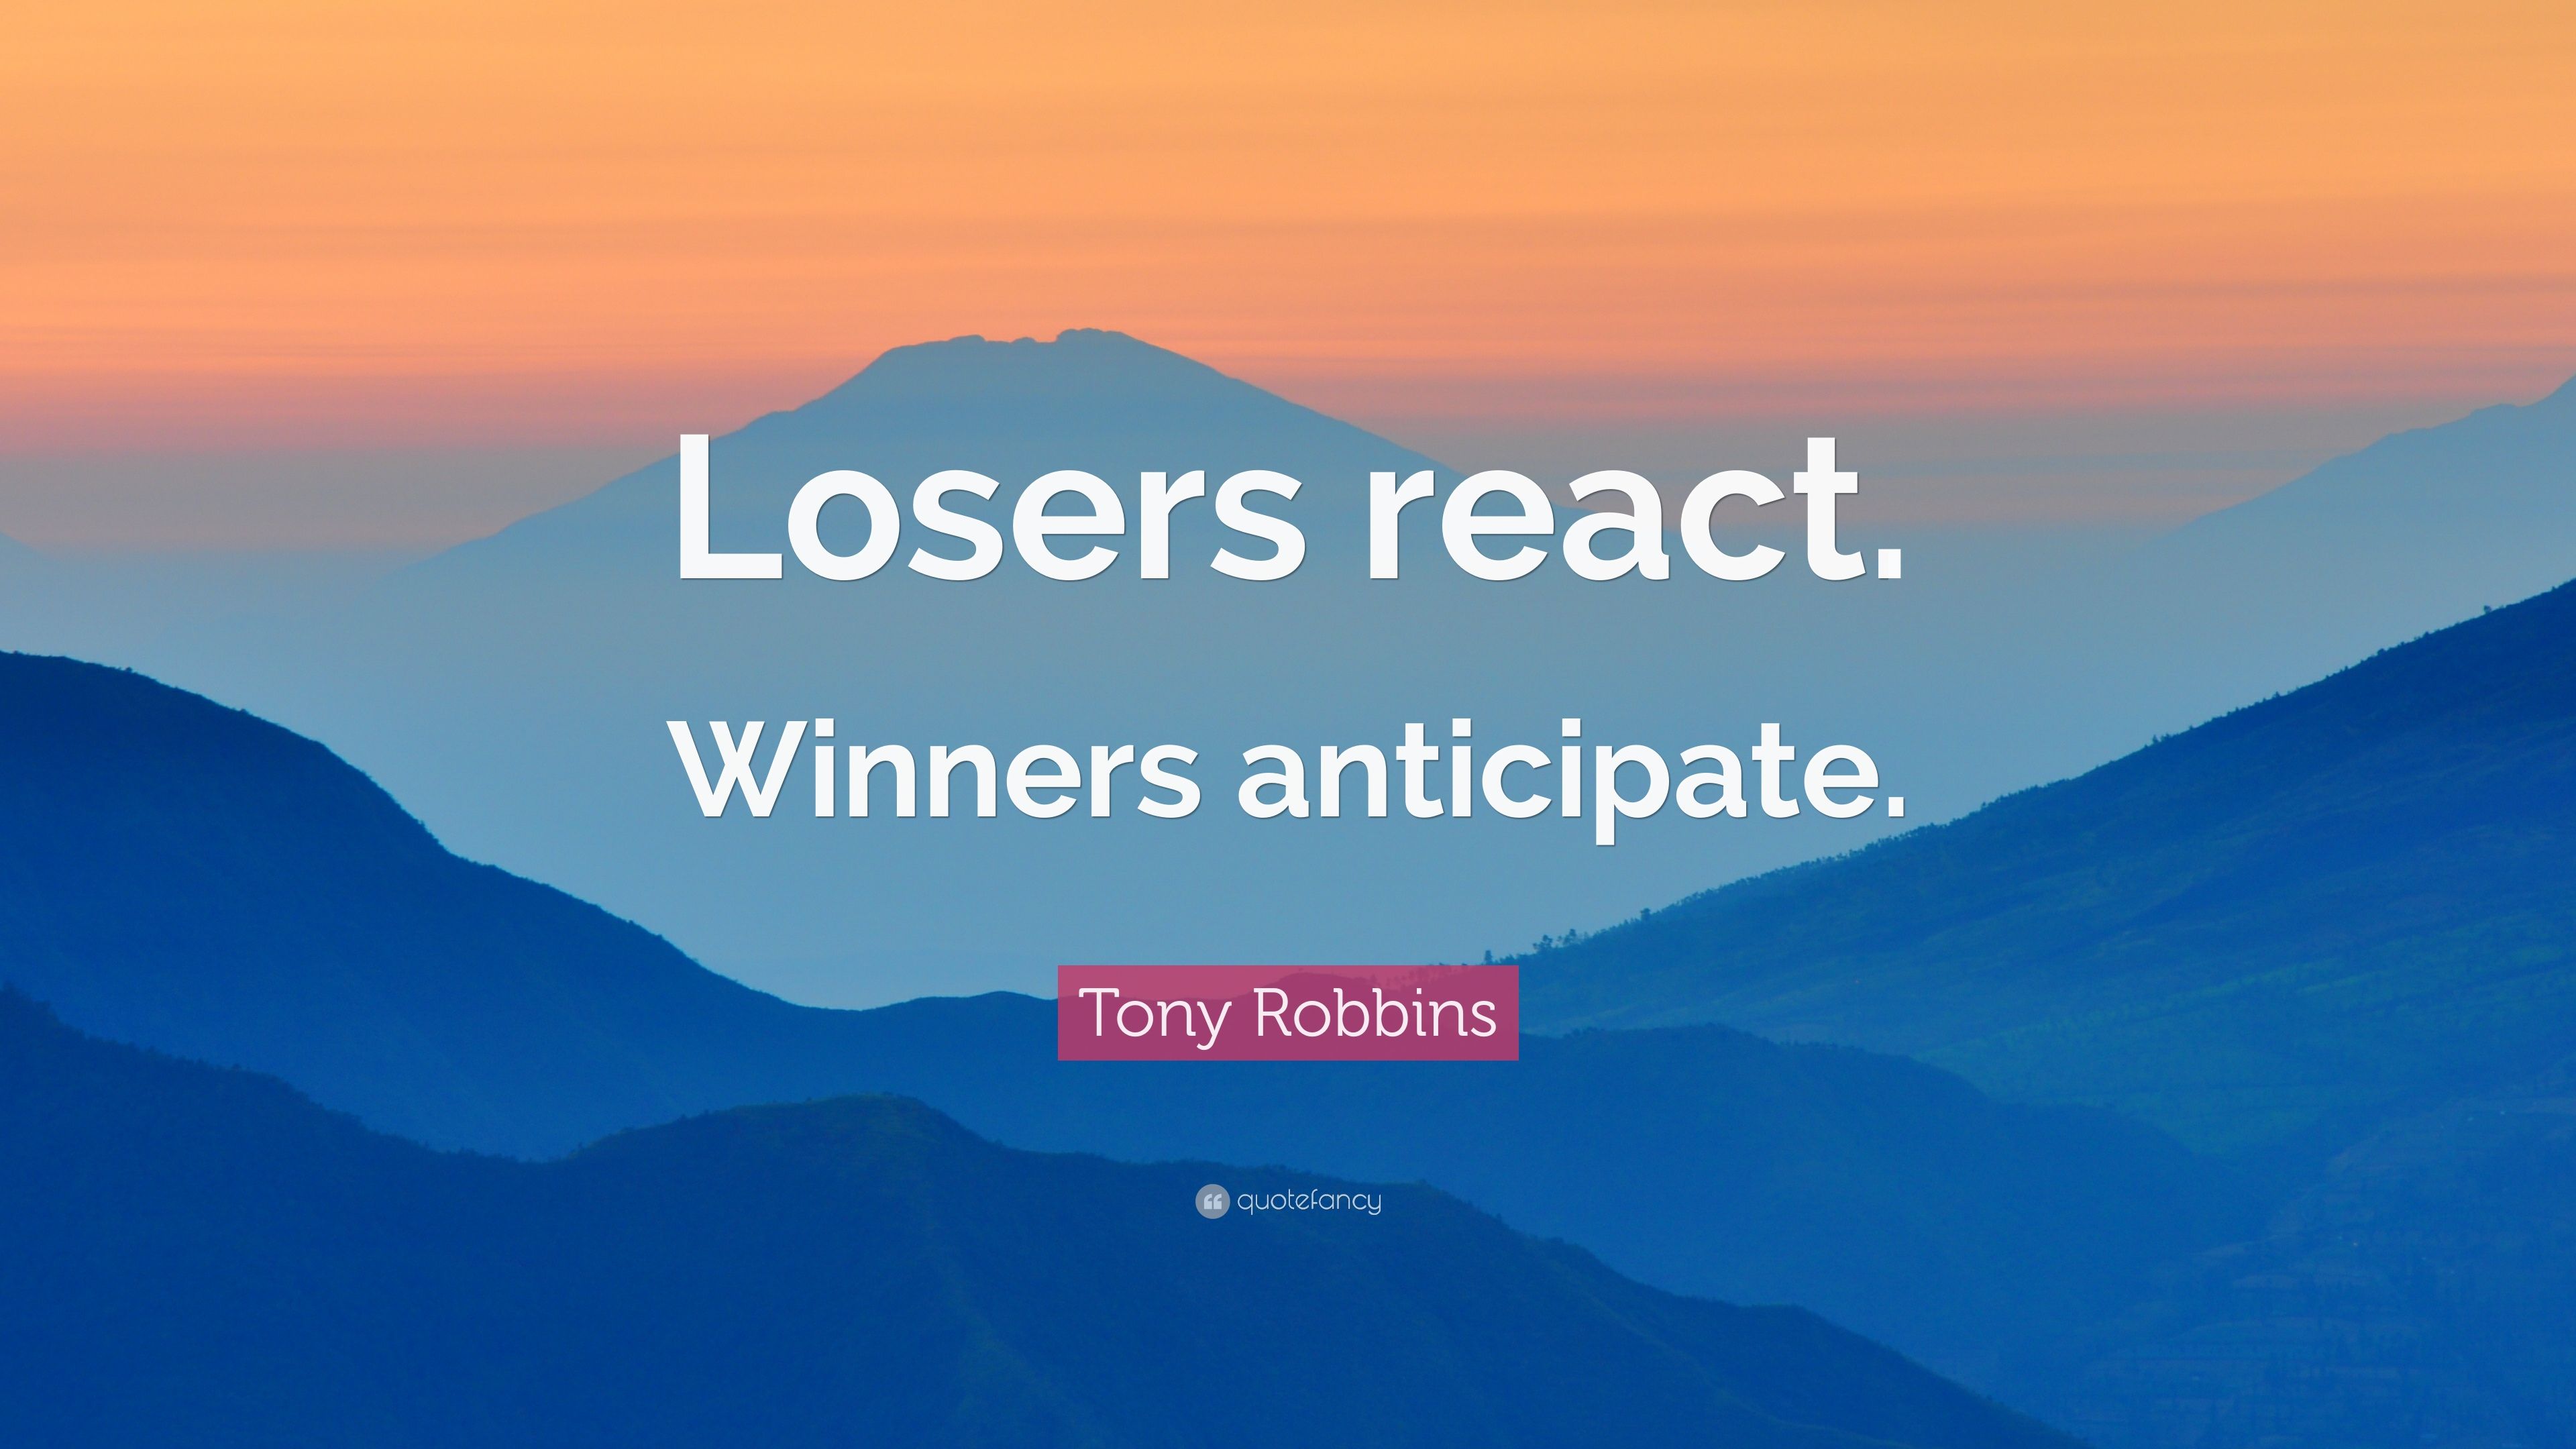 Tony Robbins Quote: “Losers react. Winners anticipate.” 12